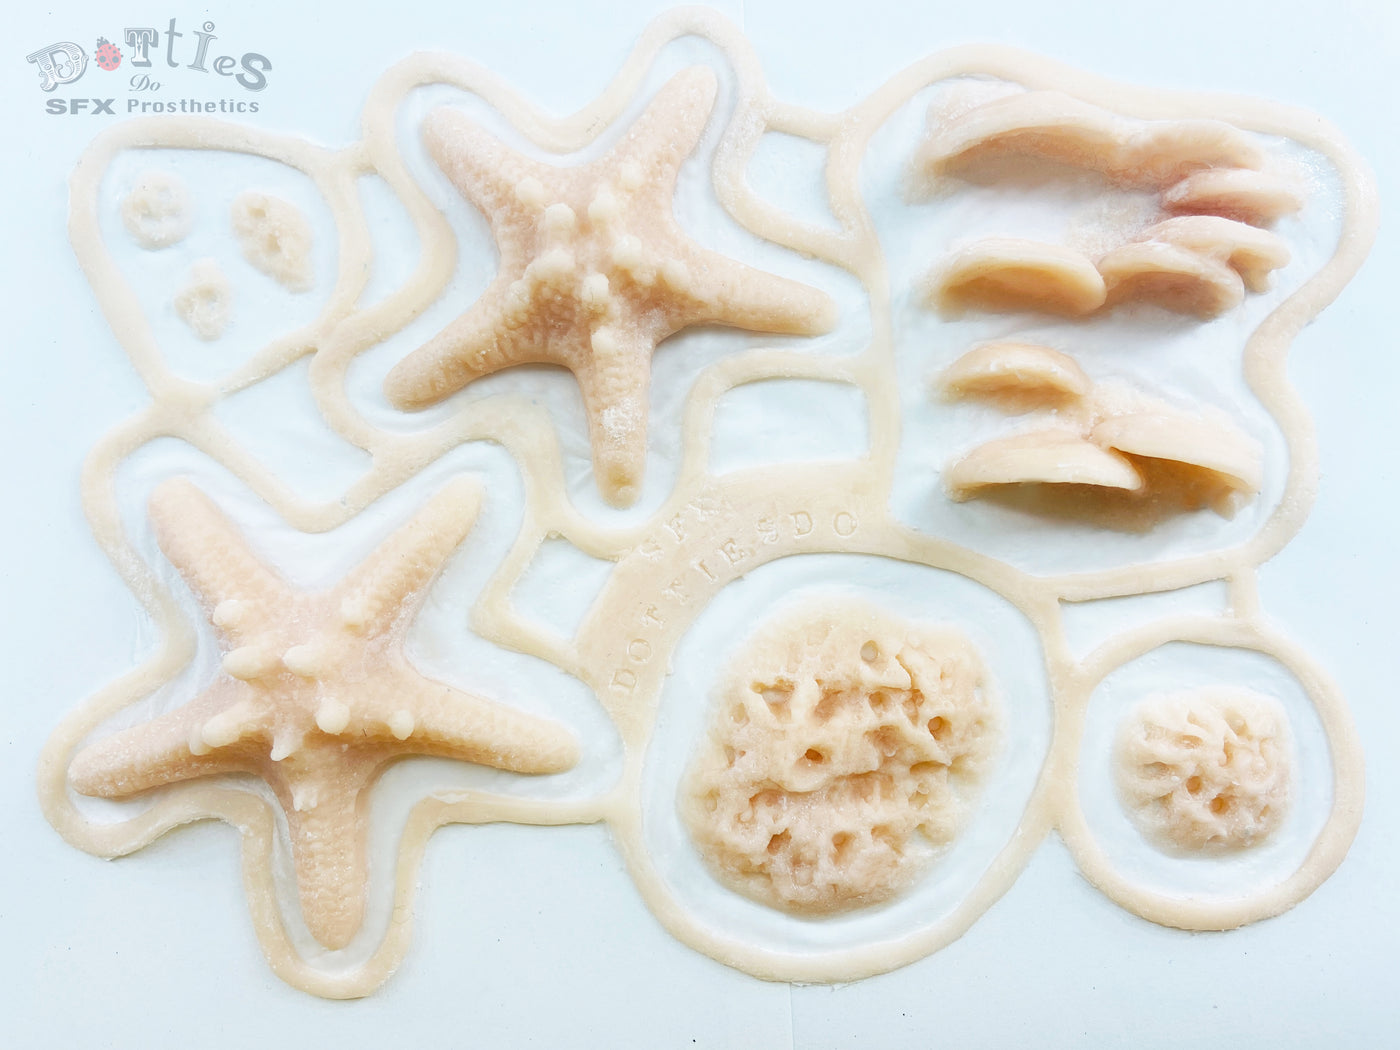 Set of 6 Unpainted Silicone Prosthetic Sea Pieces, Bootstrap Bill Inspired